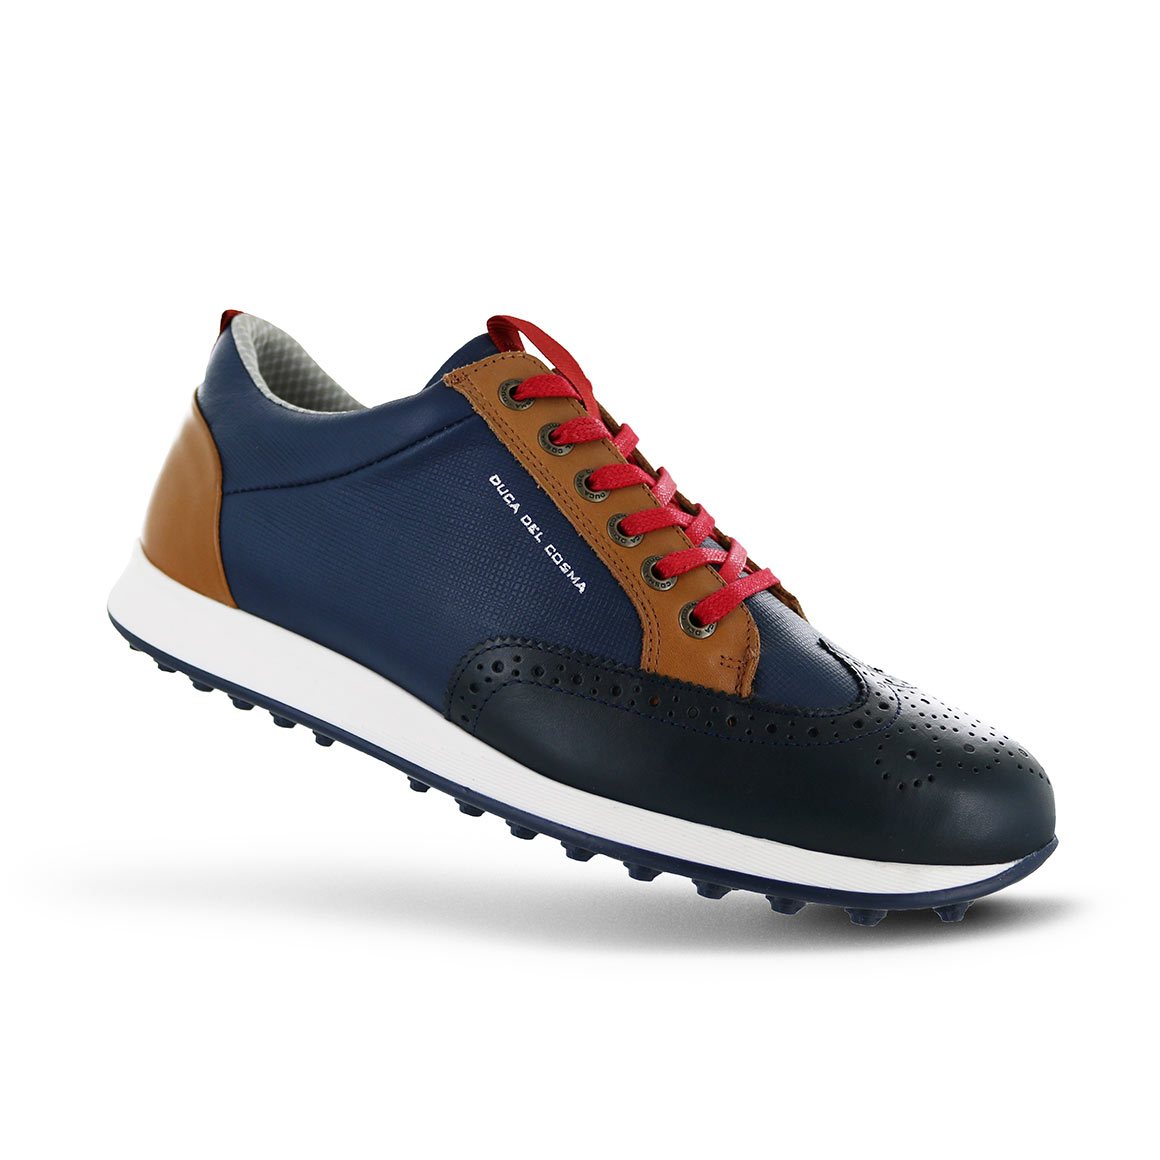 The #1 Writer in Golf: Duca Del Cosma Golf Shoes Launch into U.S. Market